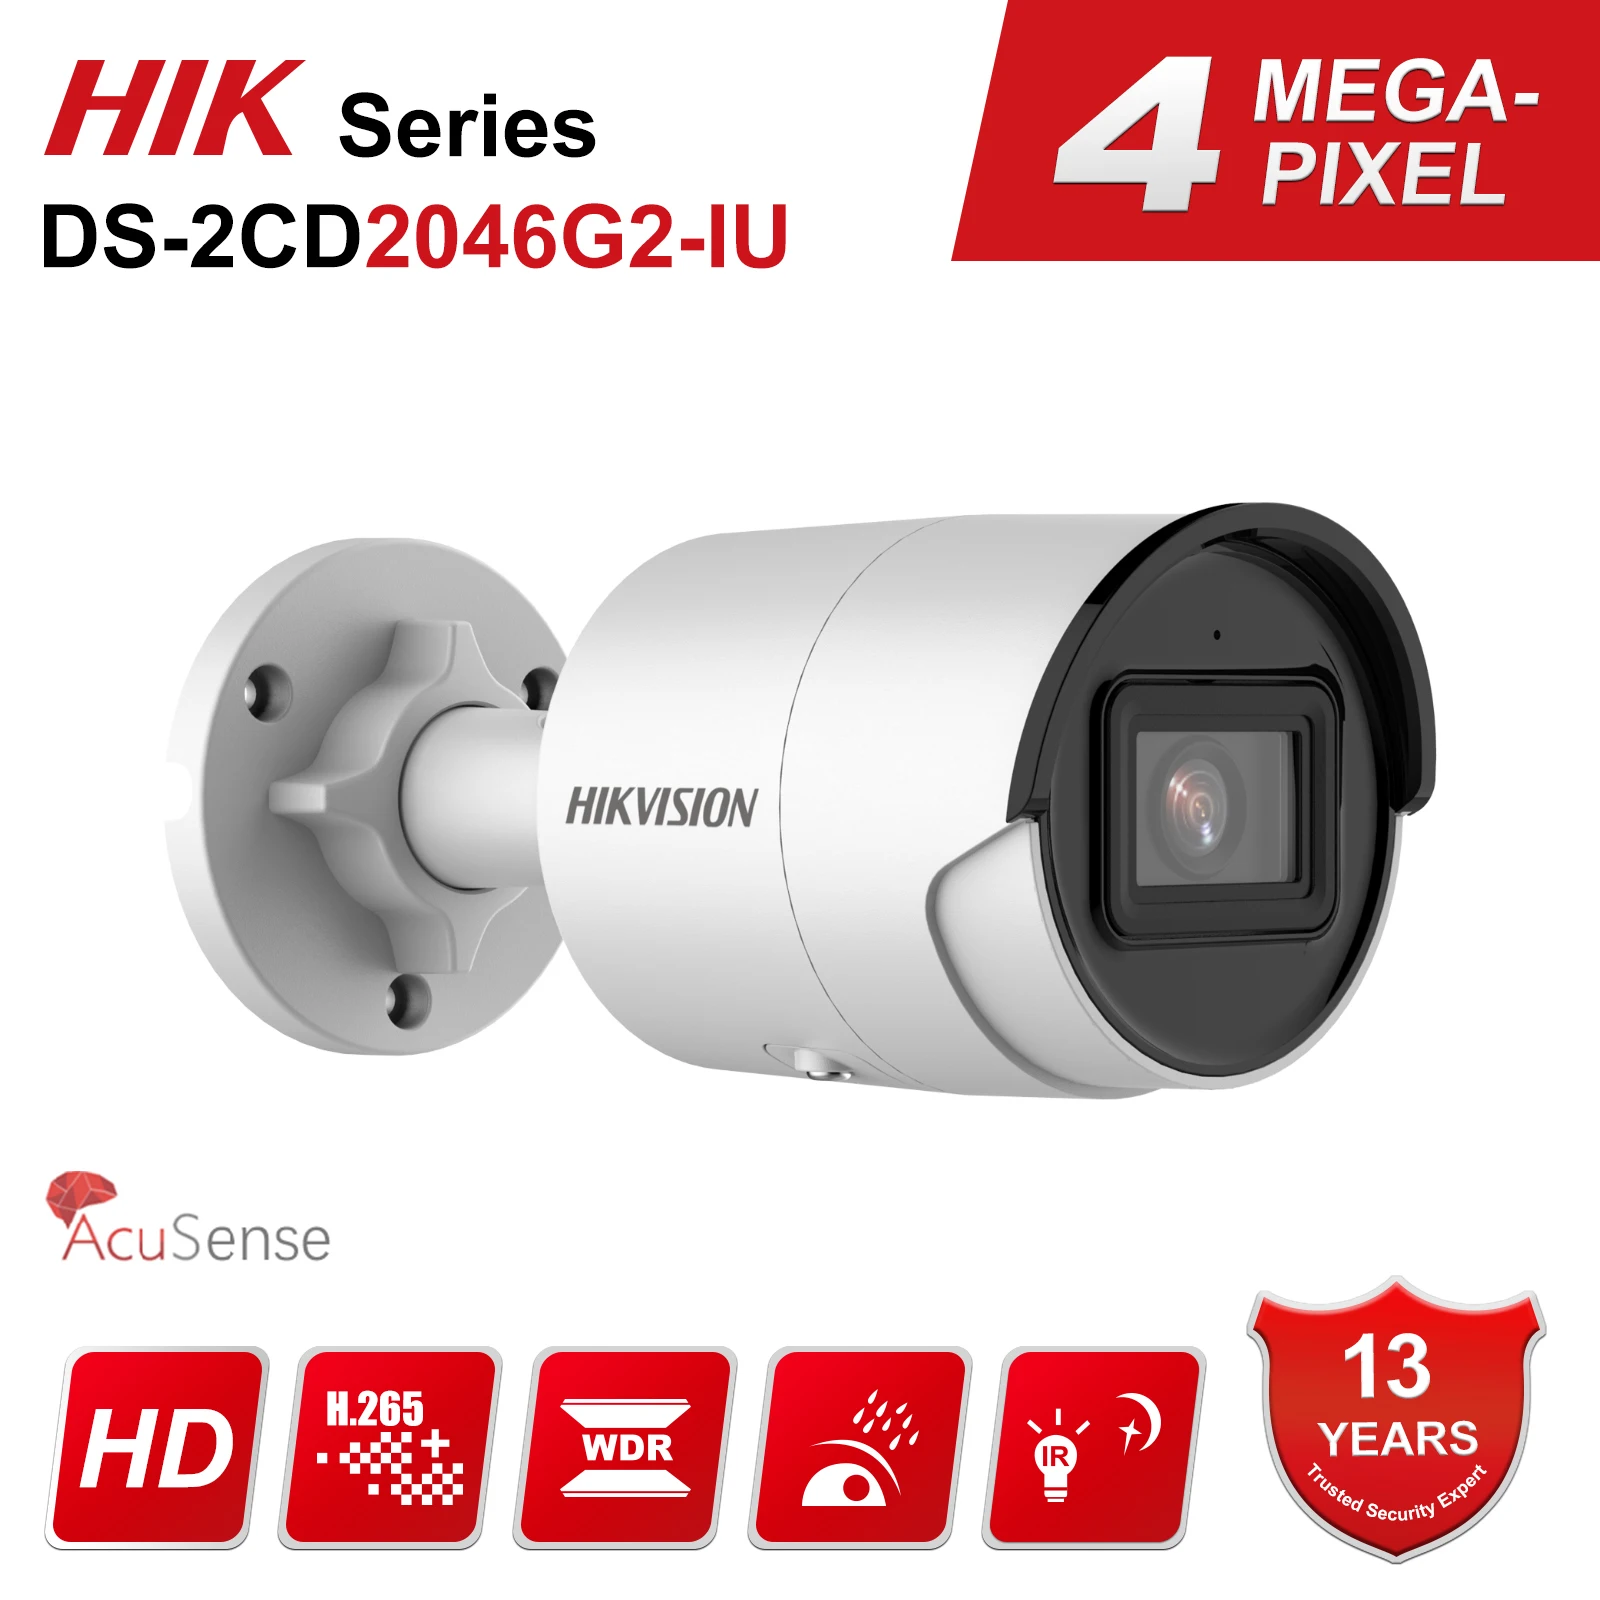 

Hikvision DS-2CD2046G2-IU 4MP AcuSense Fixed Bullet POE Network Camera Outdoor Security CCTV IP Camera Audio Recording P2P View